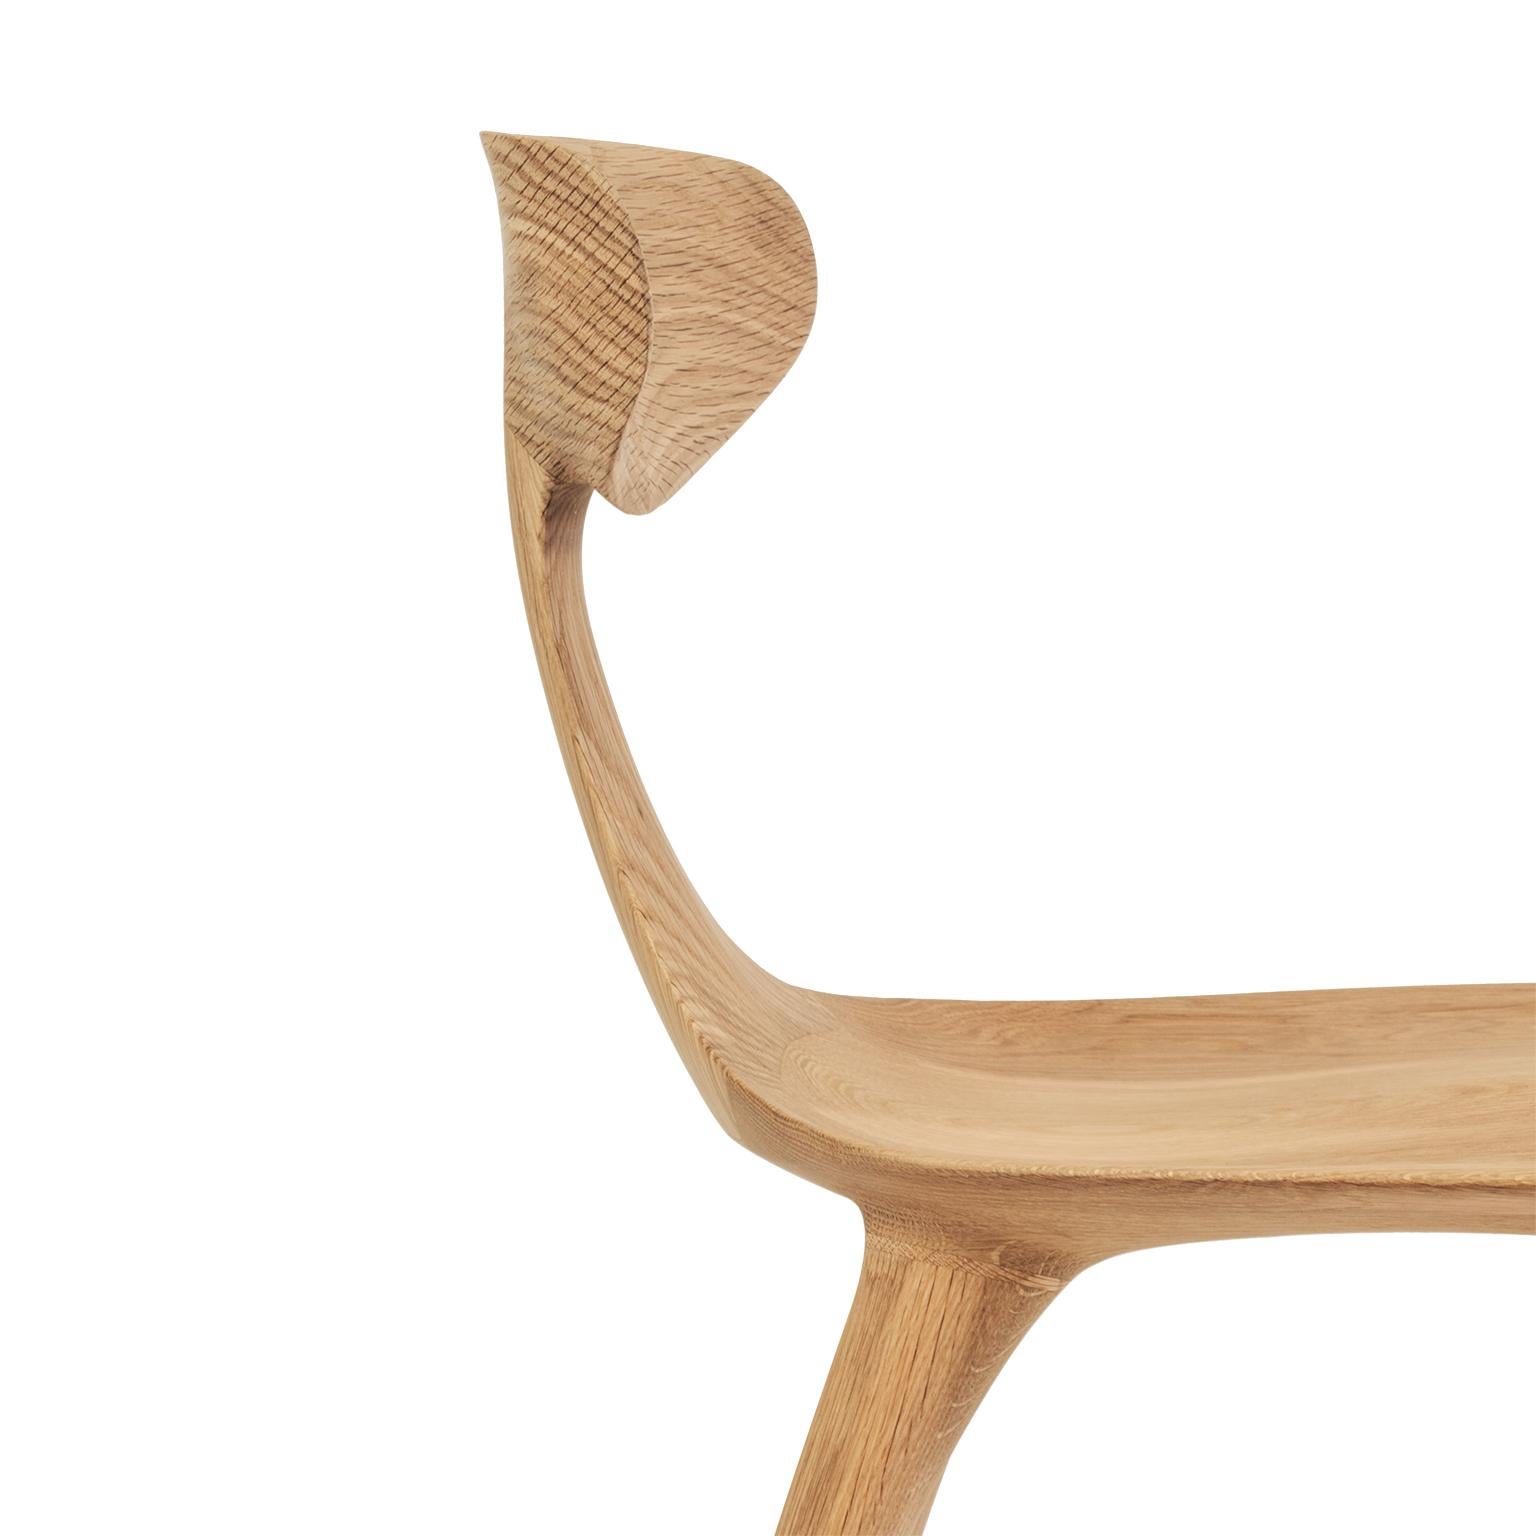 The Miranda chair began as a prototype conceived of and hand carved by Matthew Sellens of SylvanRay. Based in Bend, Oregon, Matthew's designs are often inspired by the natural forms found in the surrounding landscape. The basic concept underlying